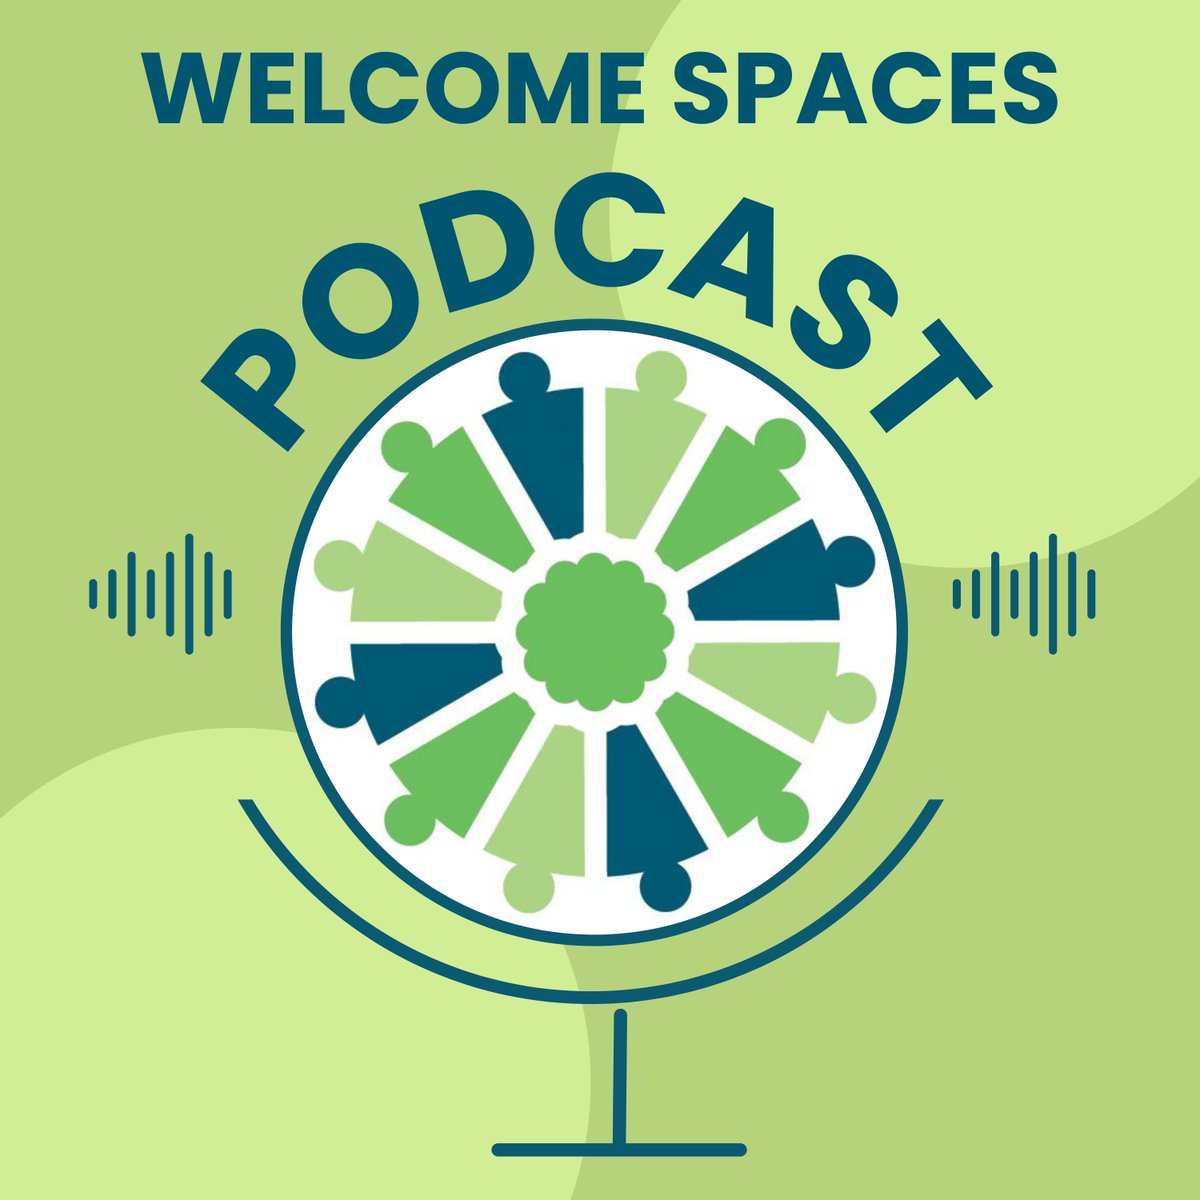 Listen to our latest #podcast episode all about welcome spaces featuring @CountyDurhamCF & Ferryhill Ladder Centre! We will discuss what welcome spaces are, how you can apply for the £3,000 grant & the impact the fund has made. Listen now: open.spotify.com/episode/2kvj1t…